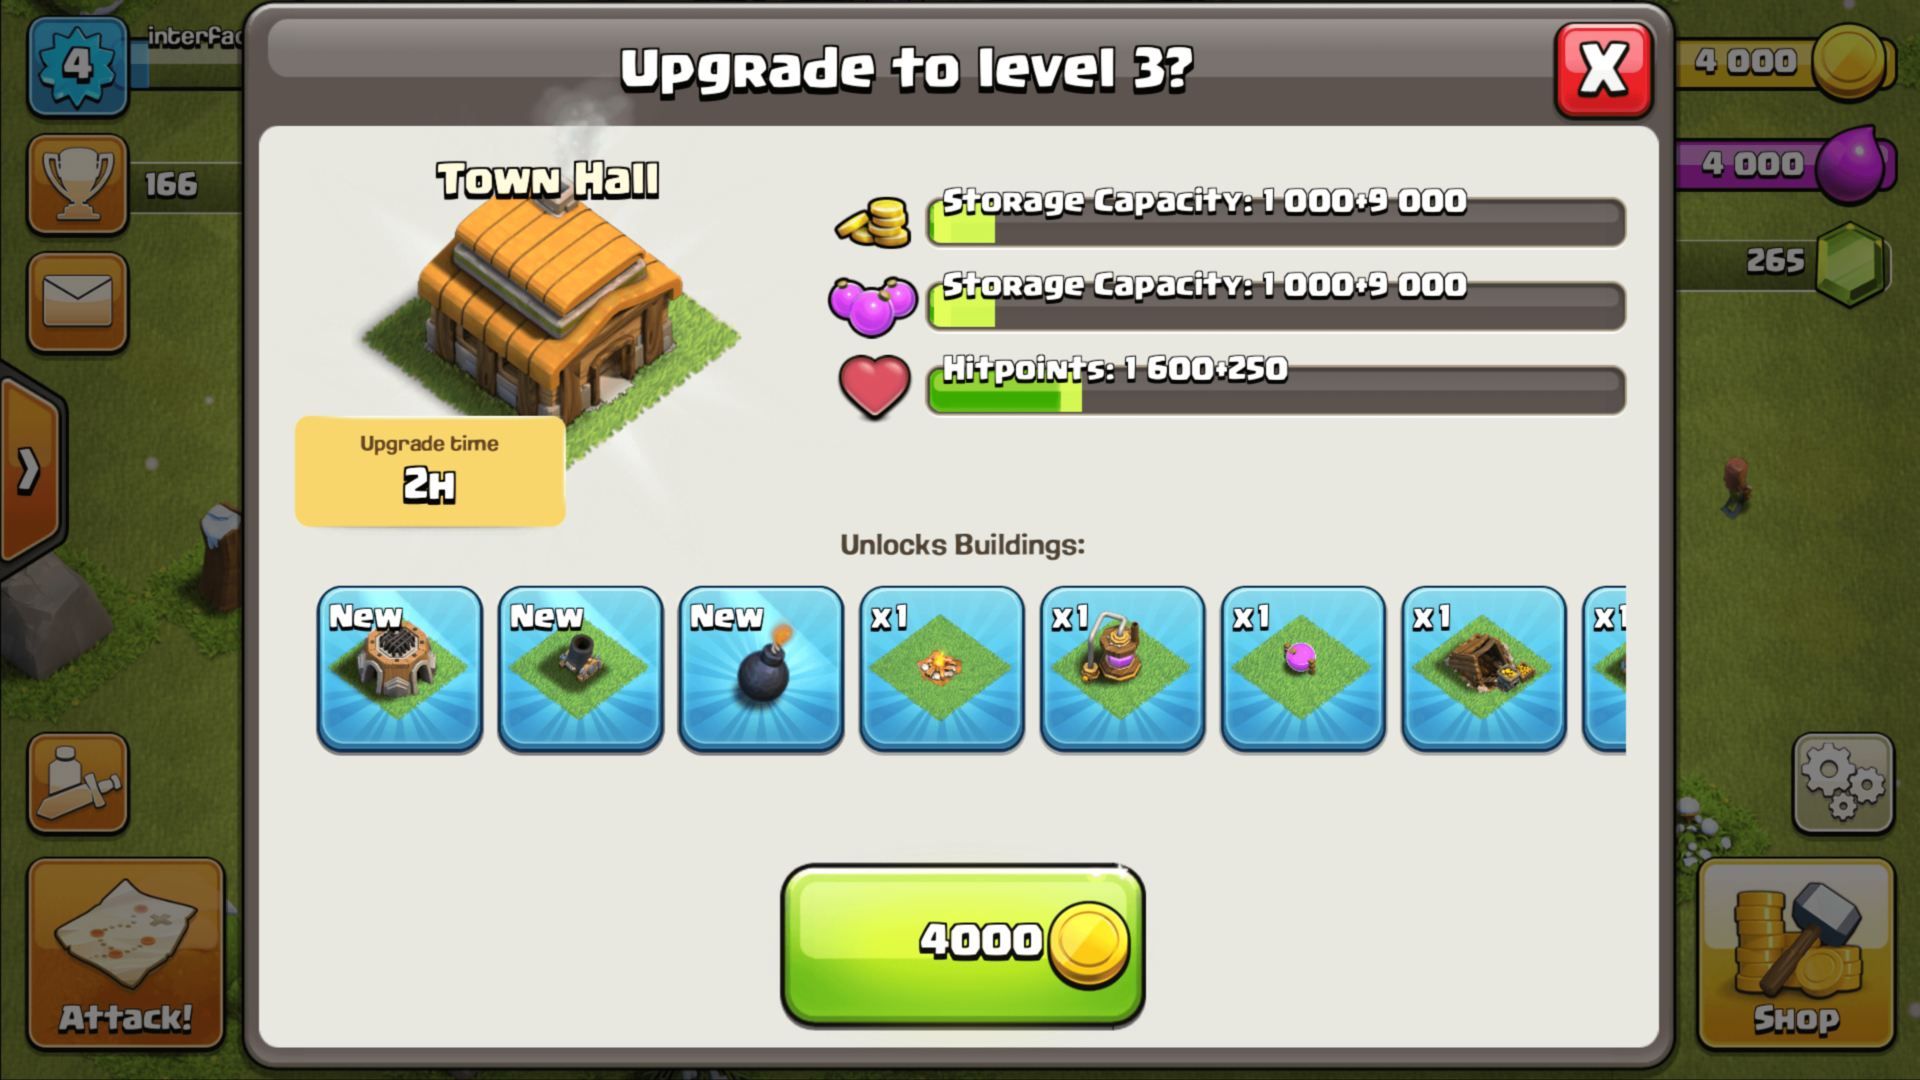 Upgrade Town Hall screenshot of Clash of Clans video game interface.